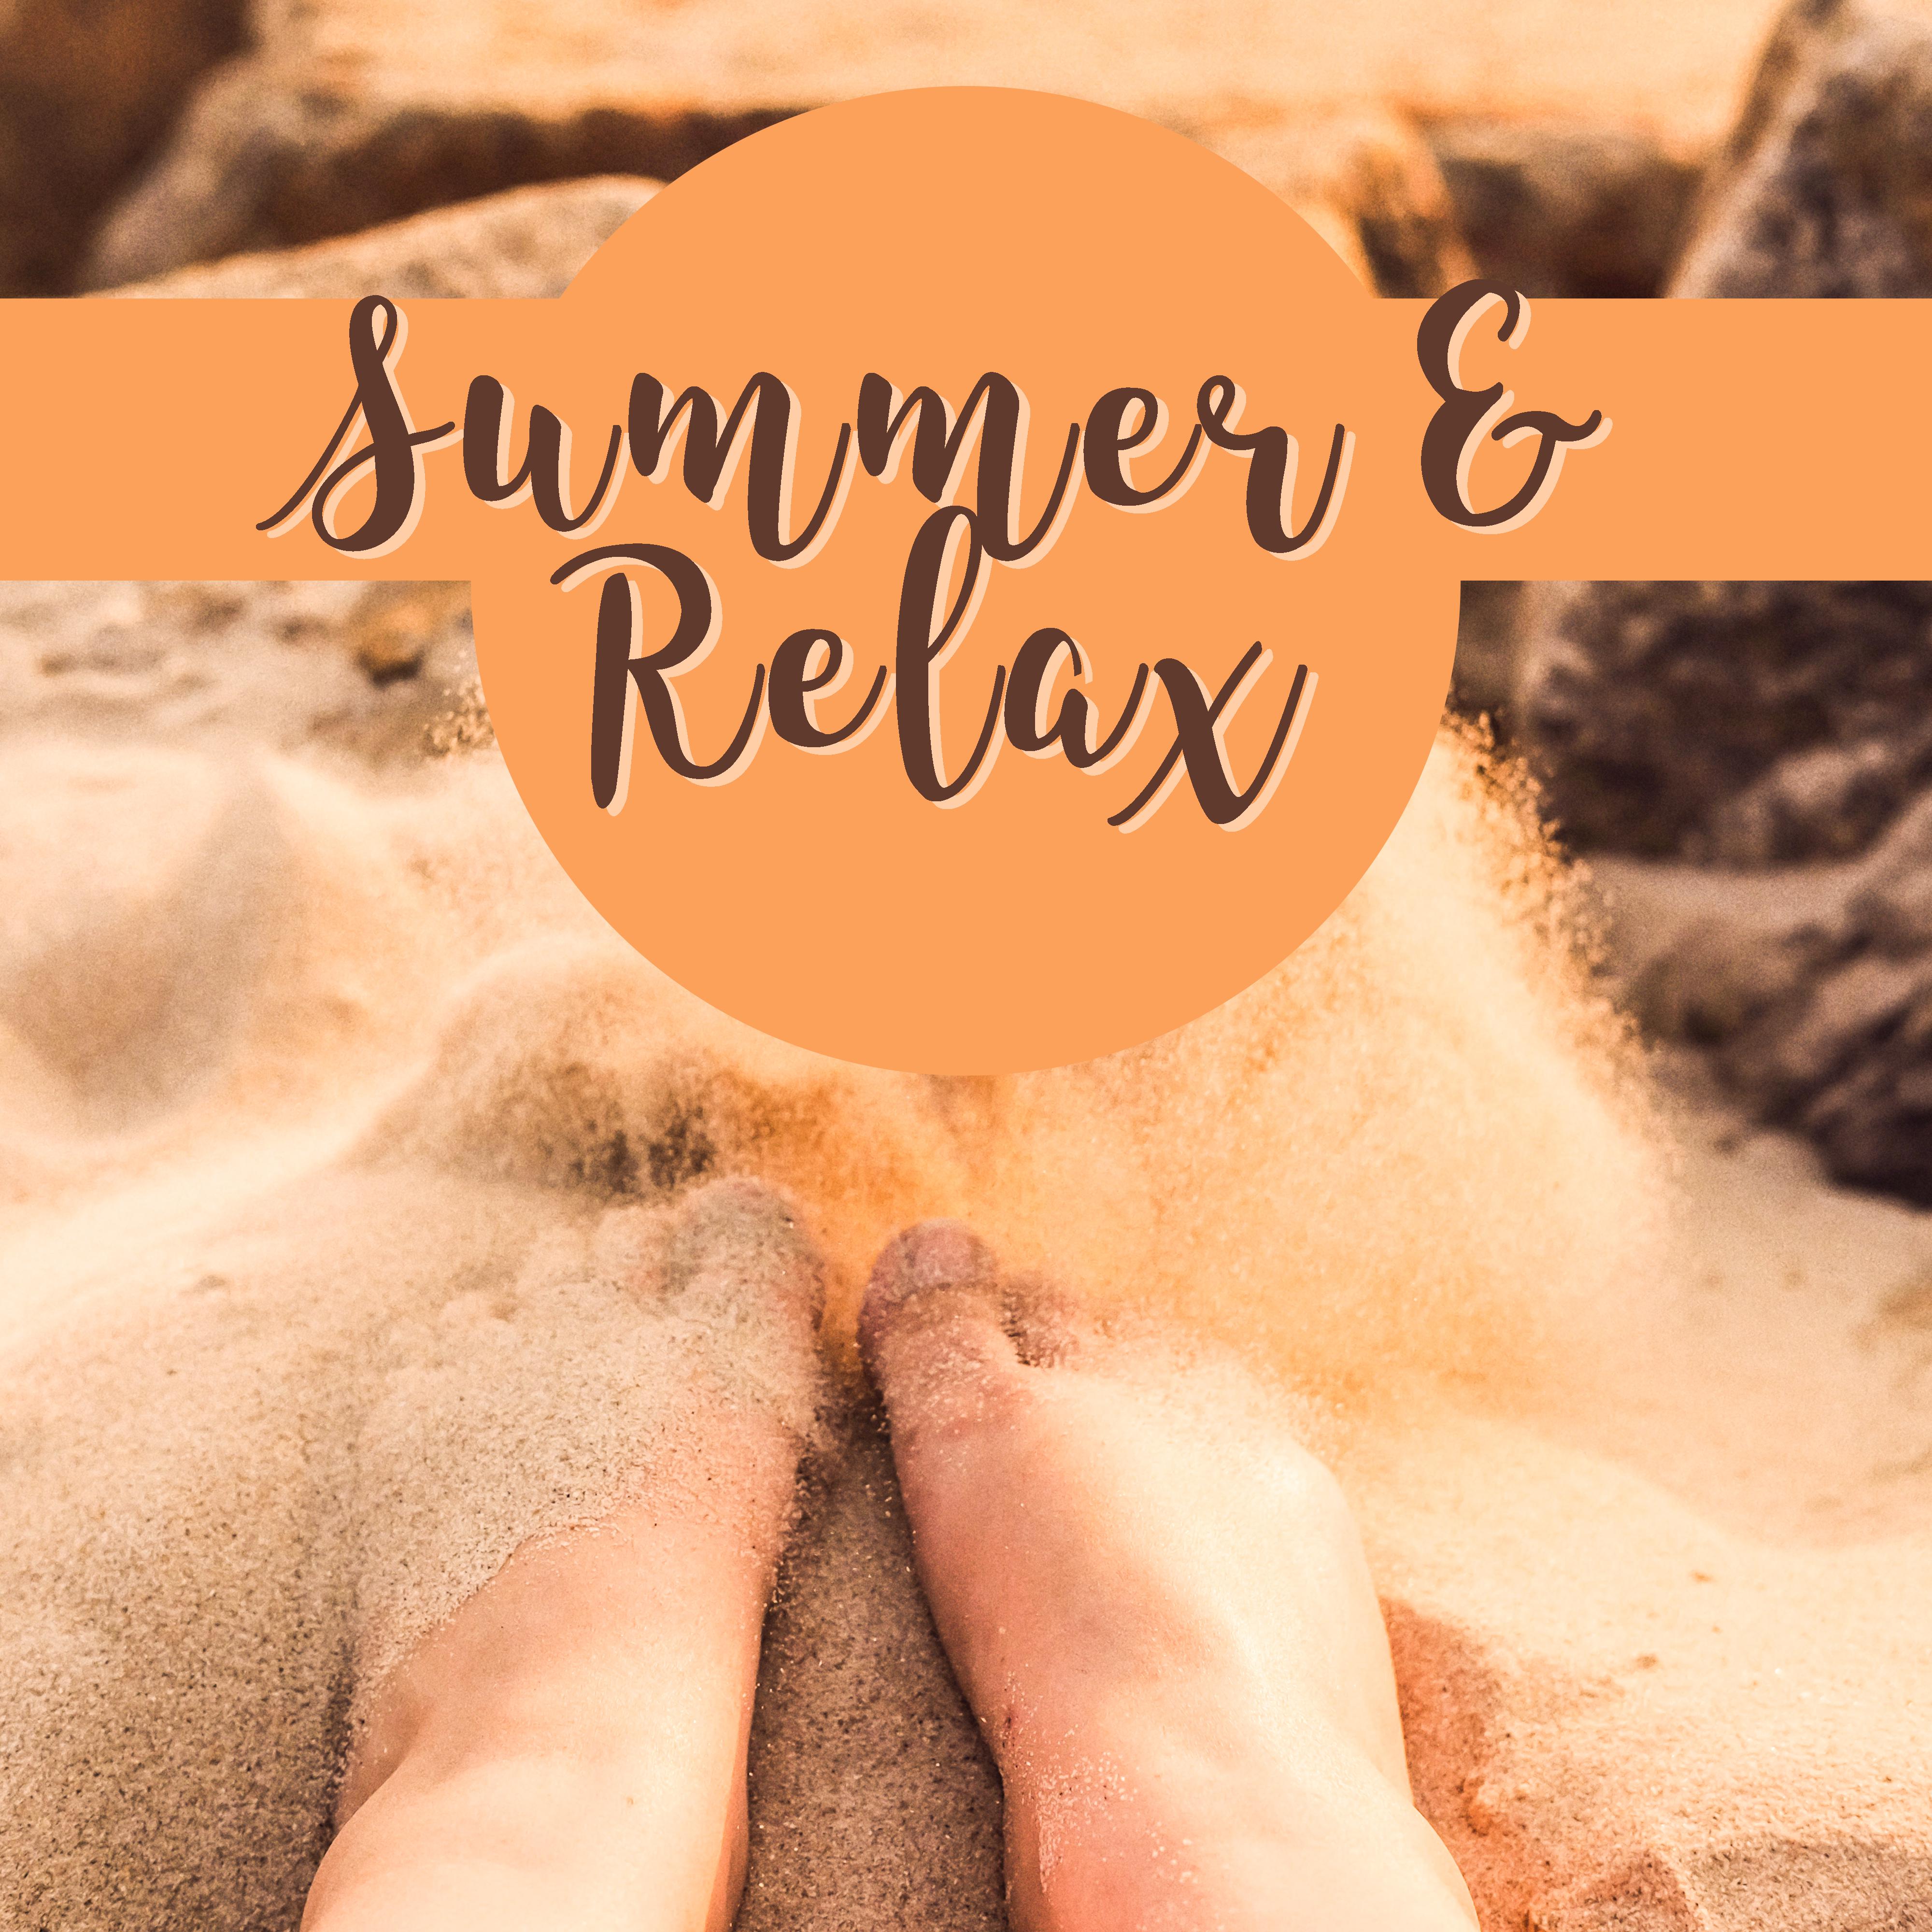 Summer & Relax – Pure Rest, Beach Music, Holiday Chill Out, Stress Relief, Ibiza 2017